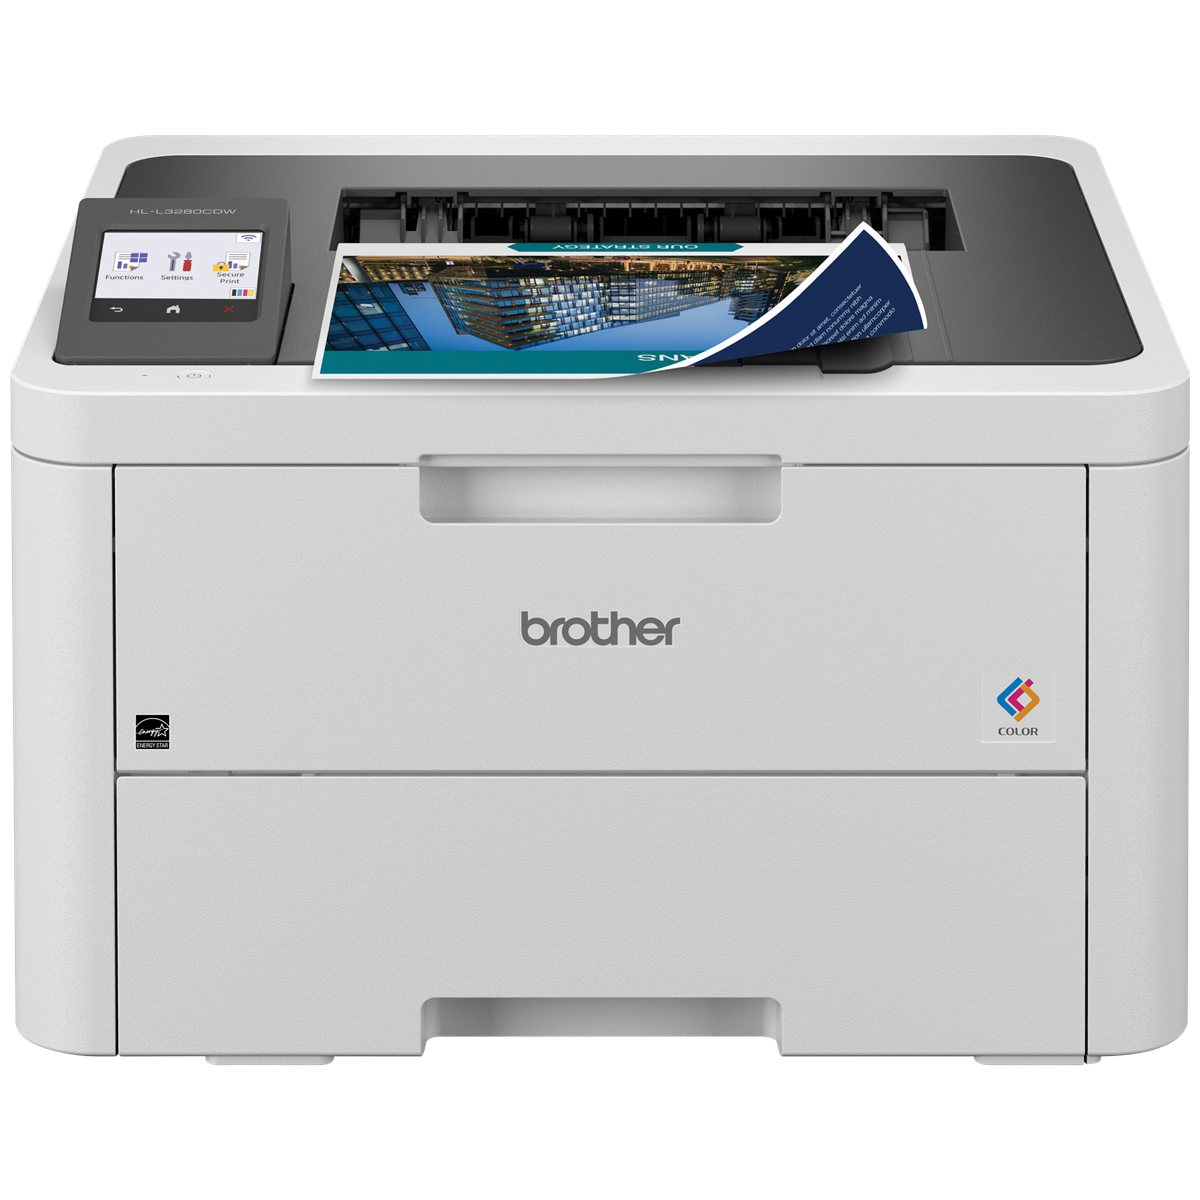 Brother HL-L3280CDW Digital Color Printer with Touchscreen